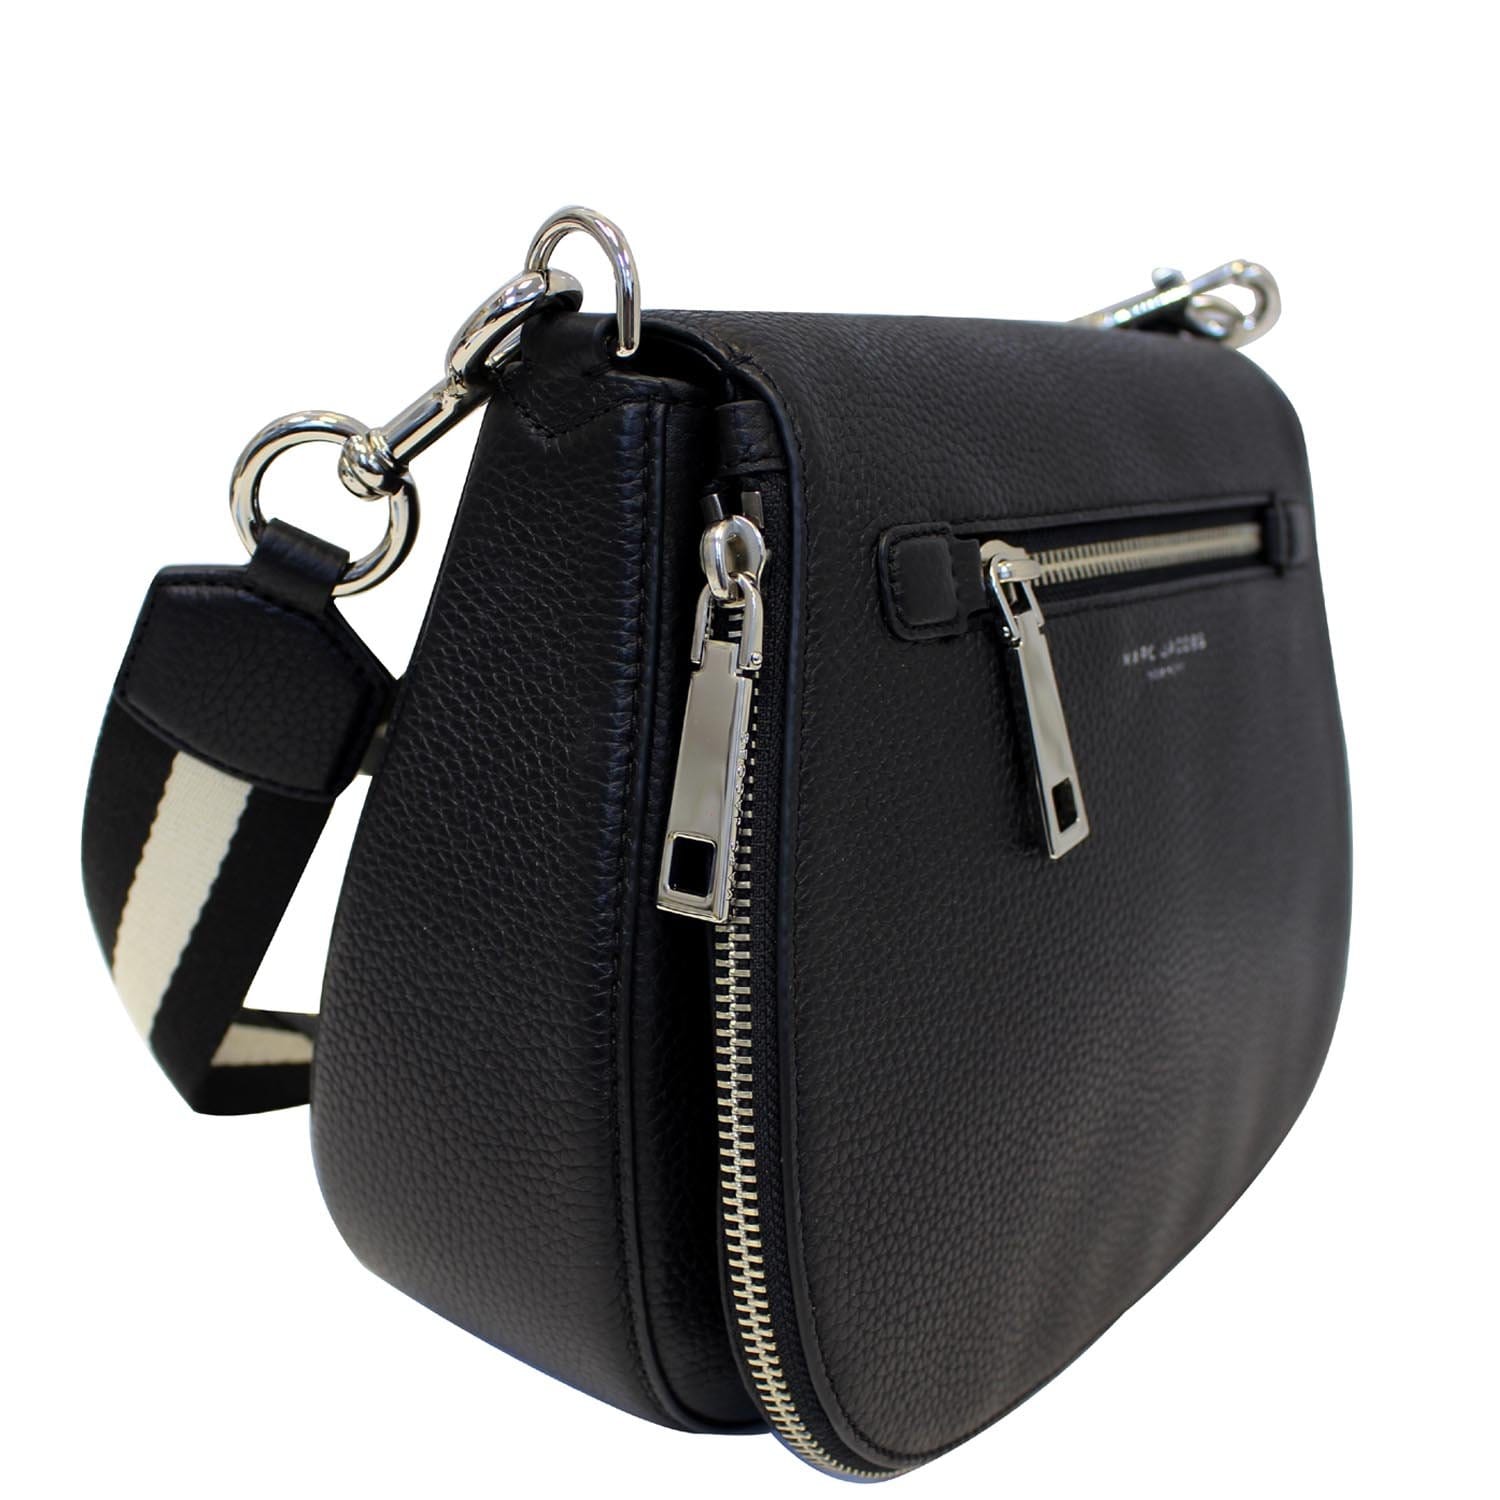 The Small Saddle Bag - Marc Jacobs - Leather - Black Pony-style